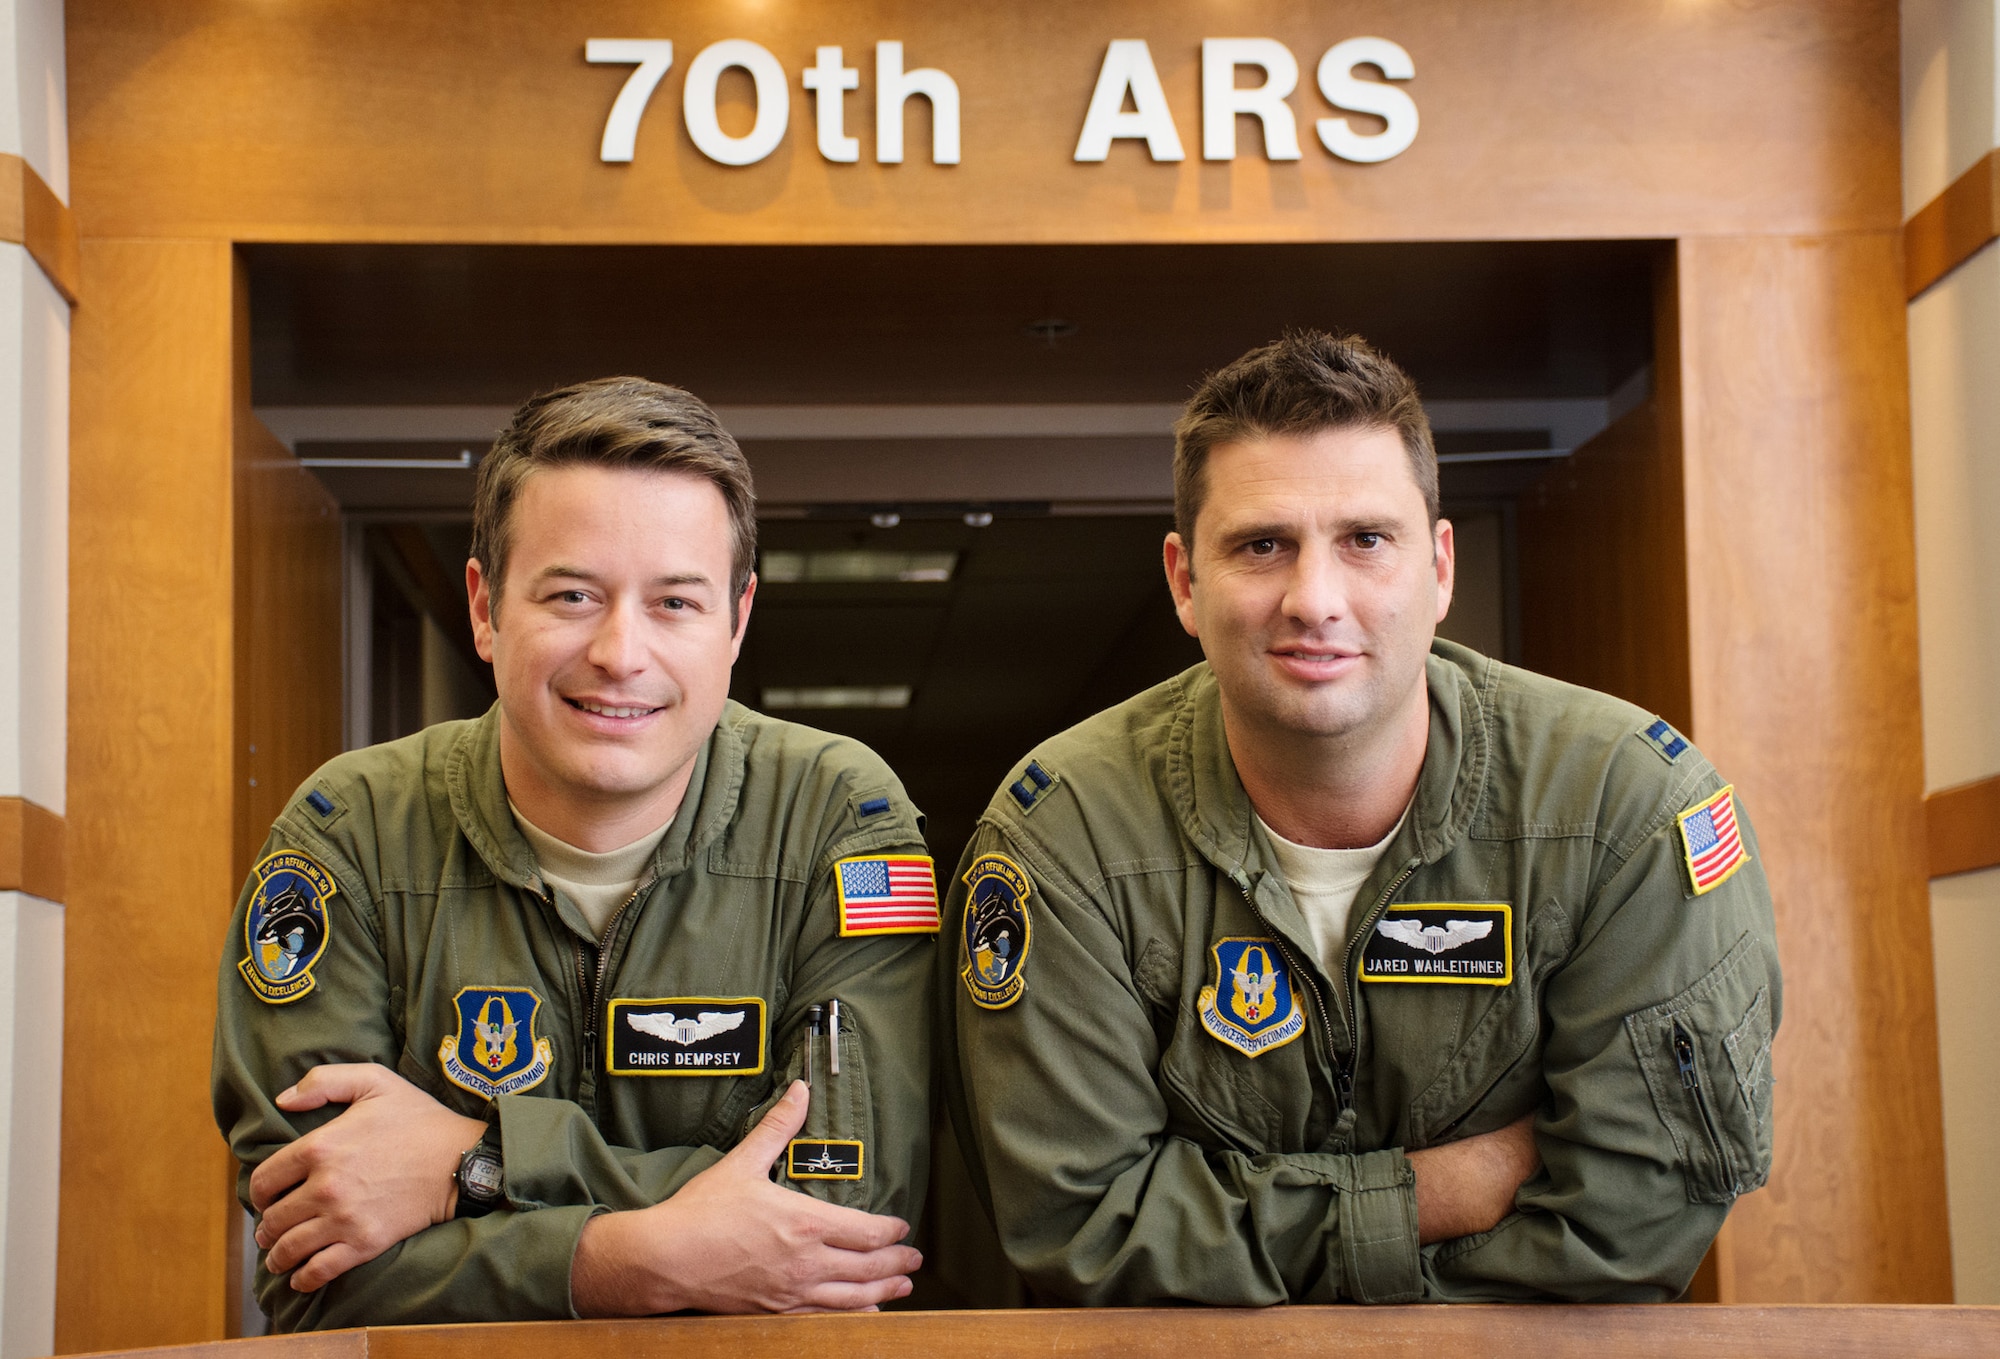 Capt. Jared Wahleithner (right) and 1st Lt. Christopher Dempsey, KC-10 Extender pilots with the 70th Air Refueling Squadron, used years of aircrew survival and first aid and buddy care training to help rescue an aircraft crash victim Sept. 17, 2016. The Citizen Airmen were taking part in the annual Clear Lake Splash In at Clear Lake, Calif., when a seaplane crashed during an attempted water landing. (U.S. Air Force photo by Ken Wright)